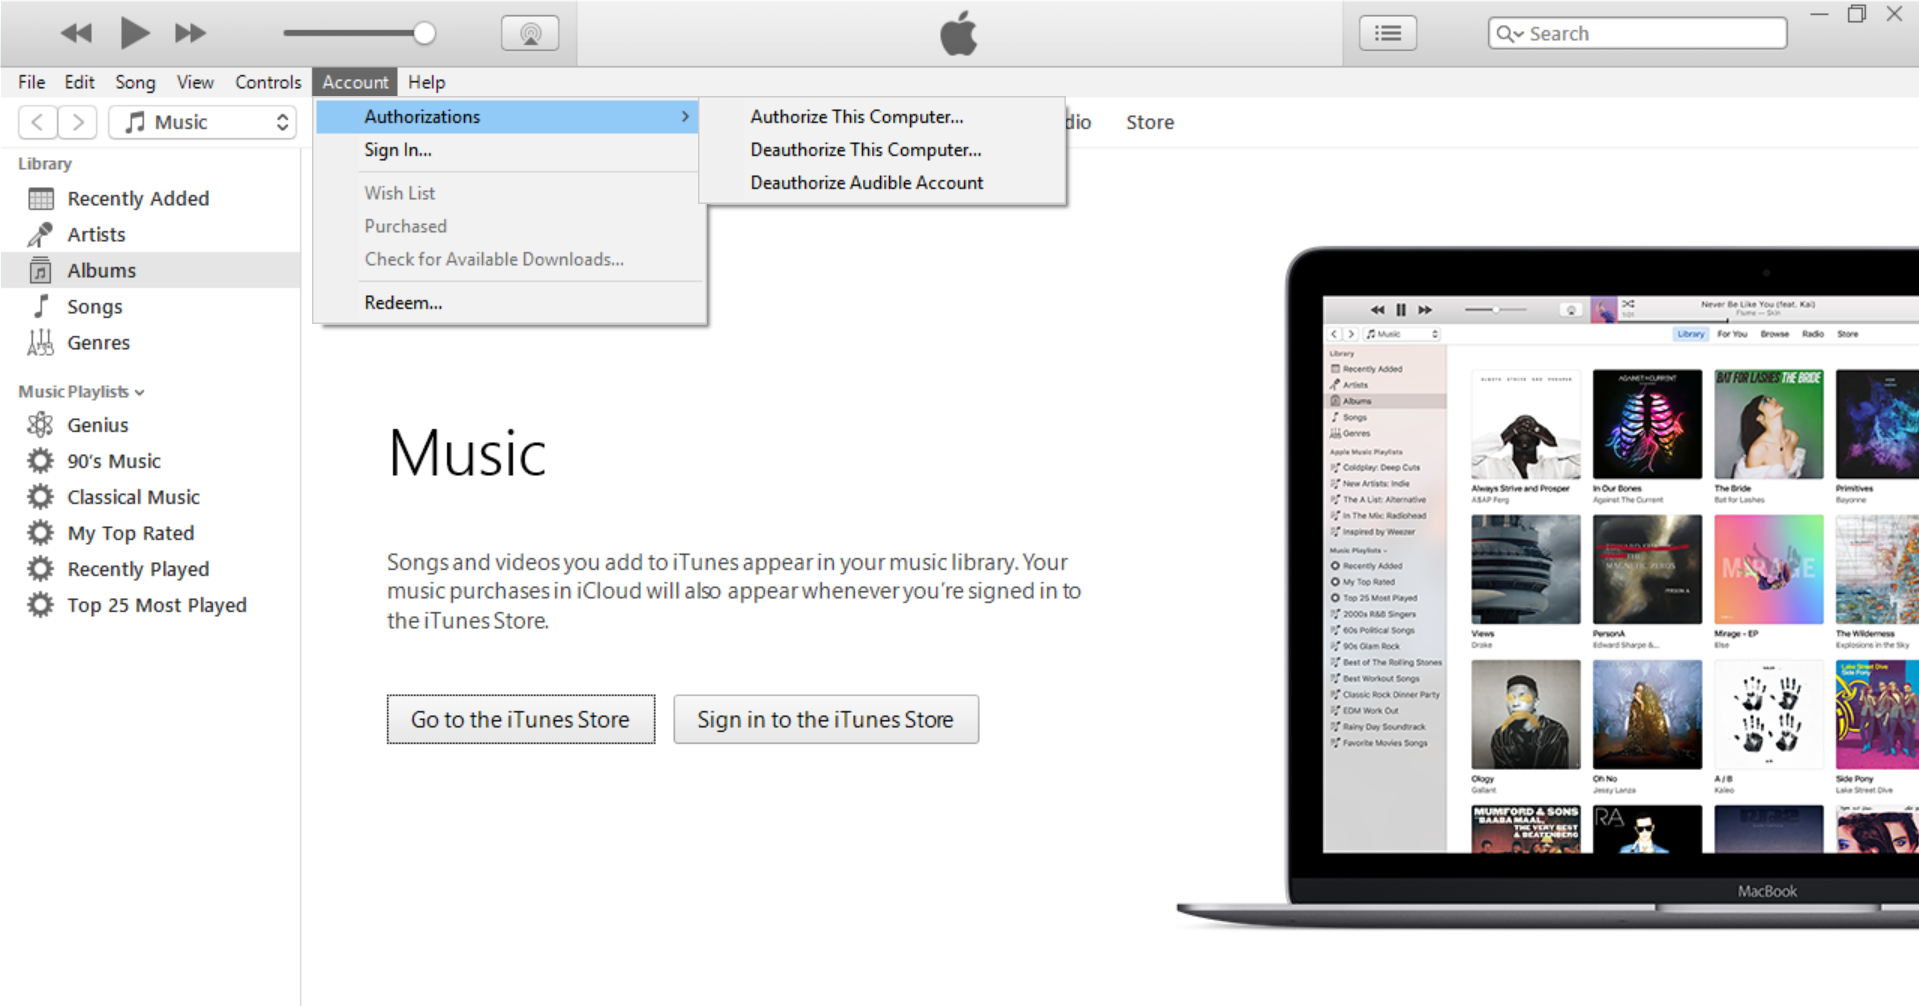 Download iTunes for Windows 10 – How To Install And Use iTunes on PC | DeviceDaily.com